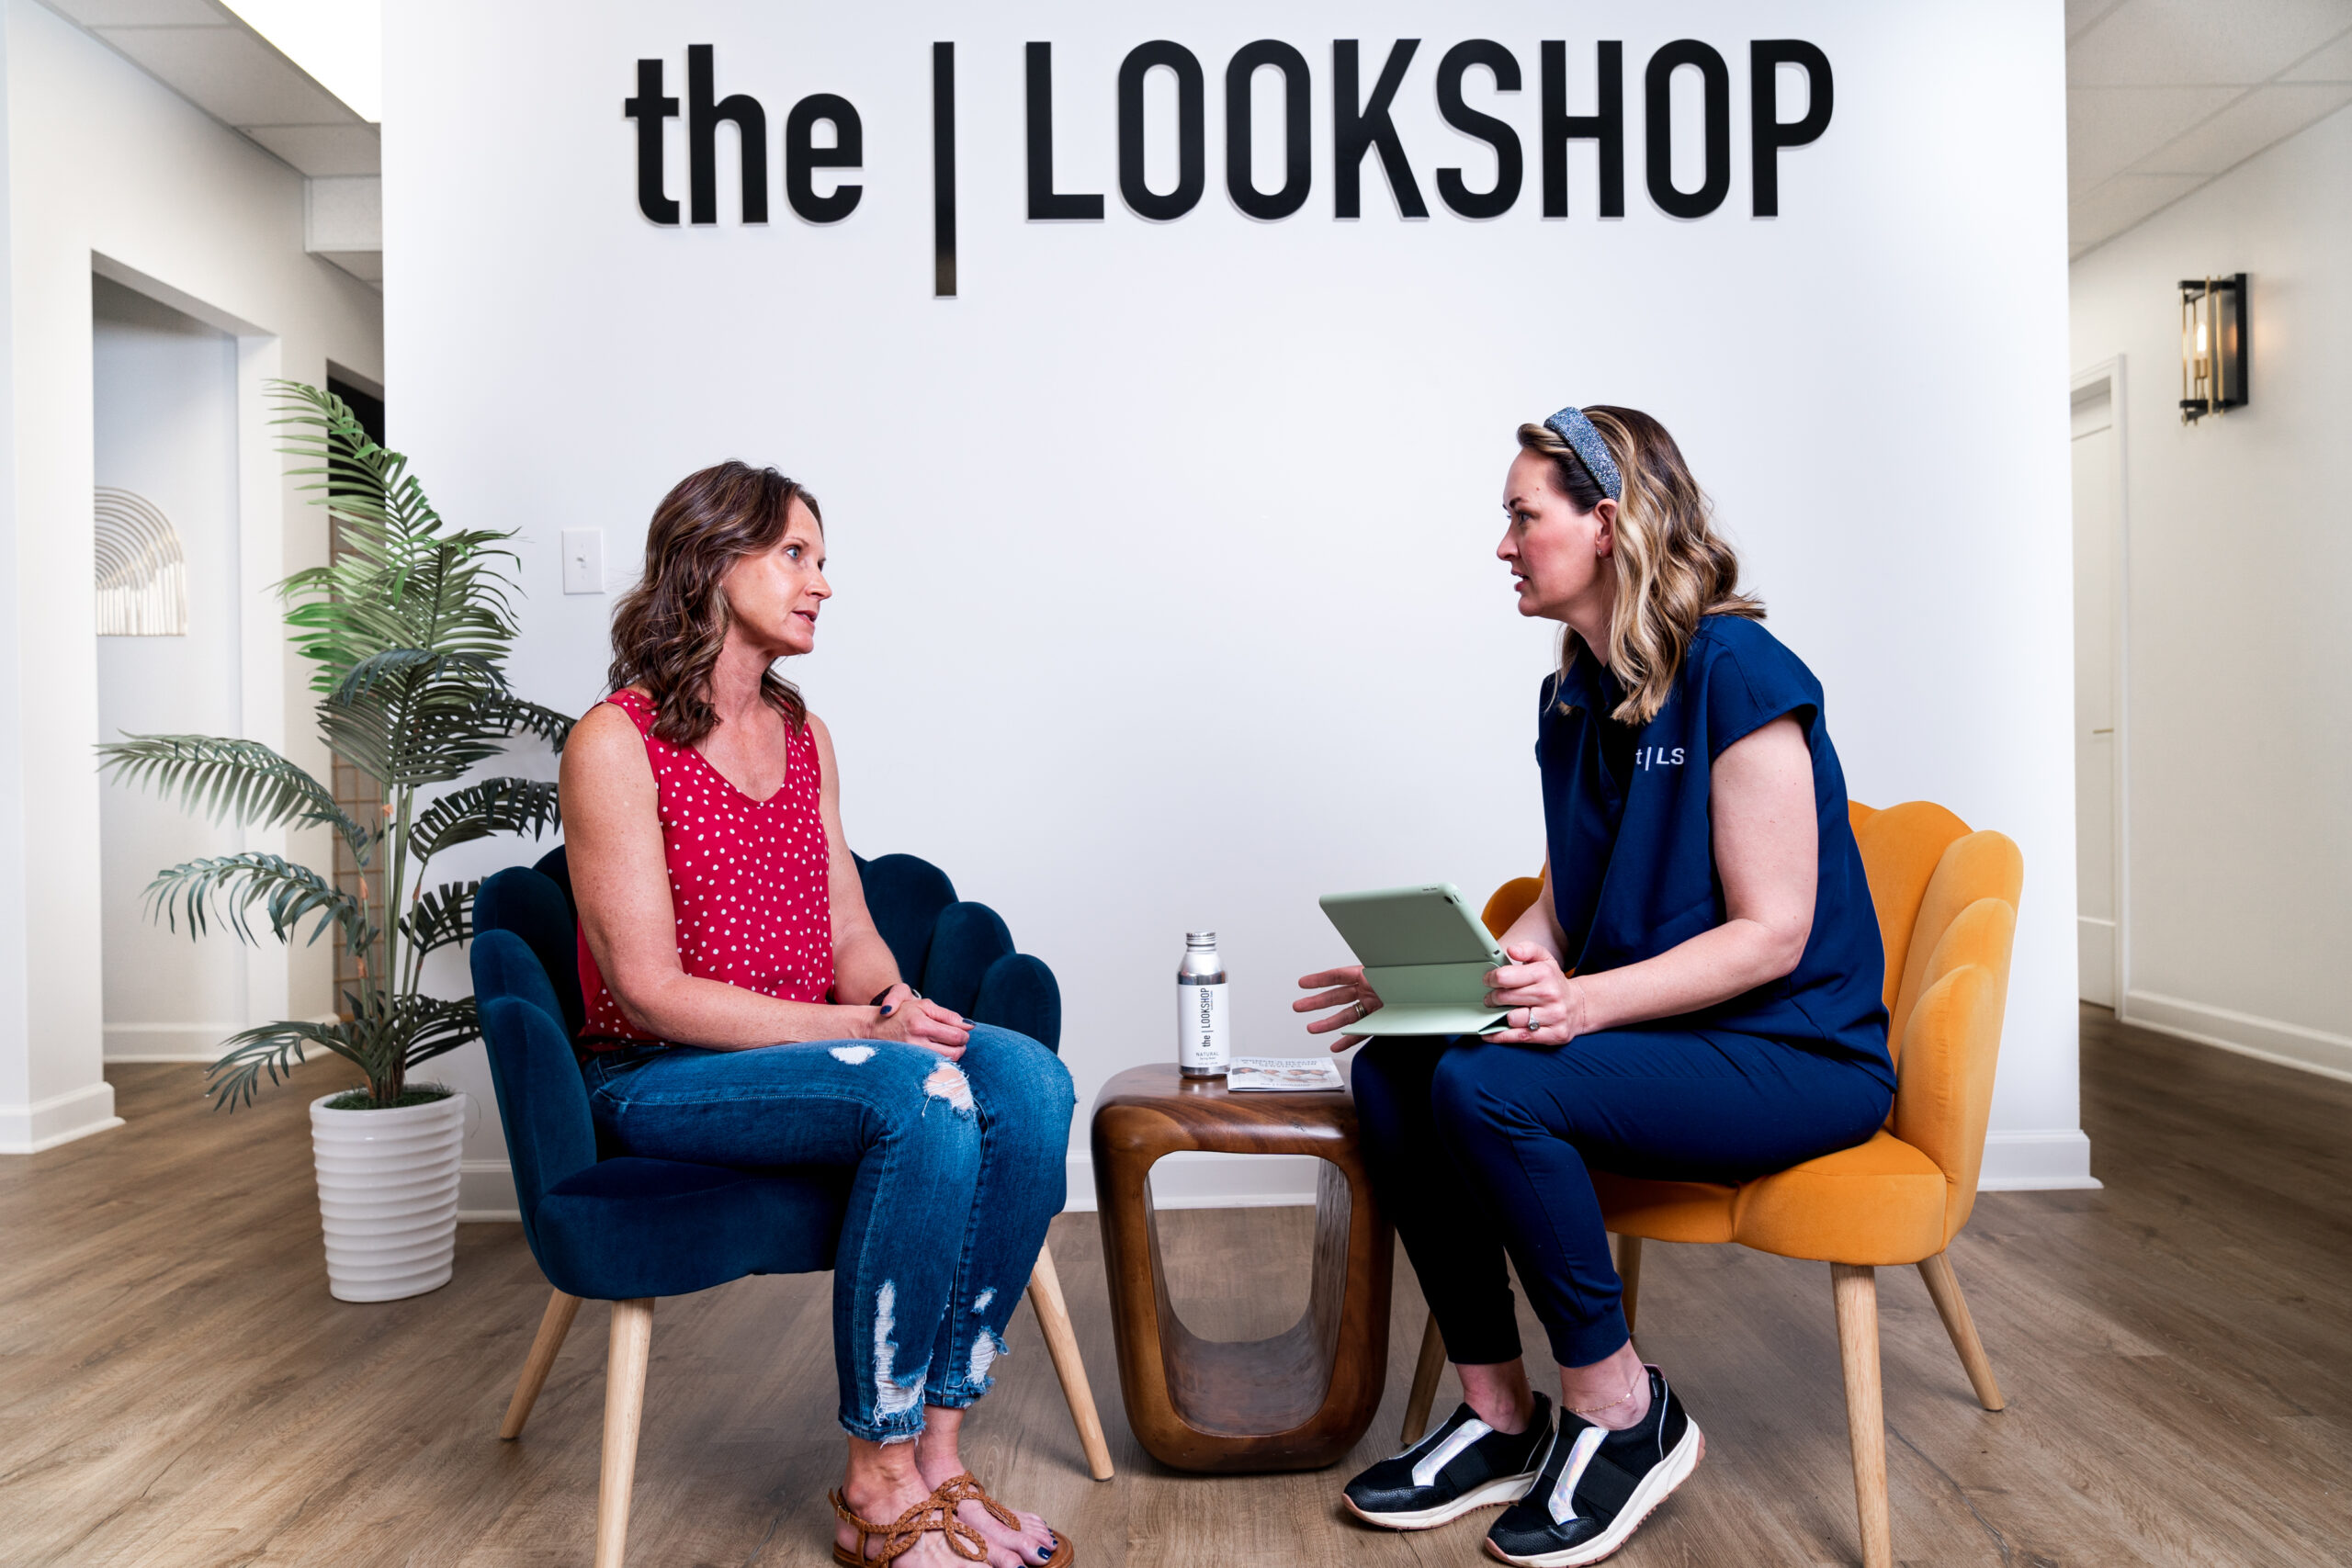 A consult at The Lookshop to discuss women's health services.